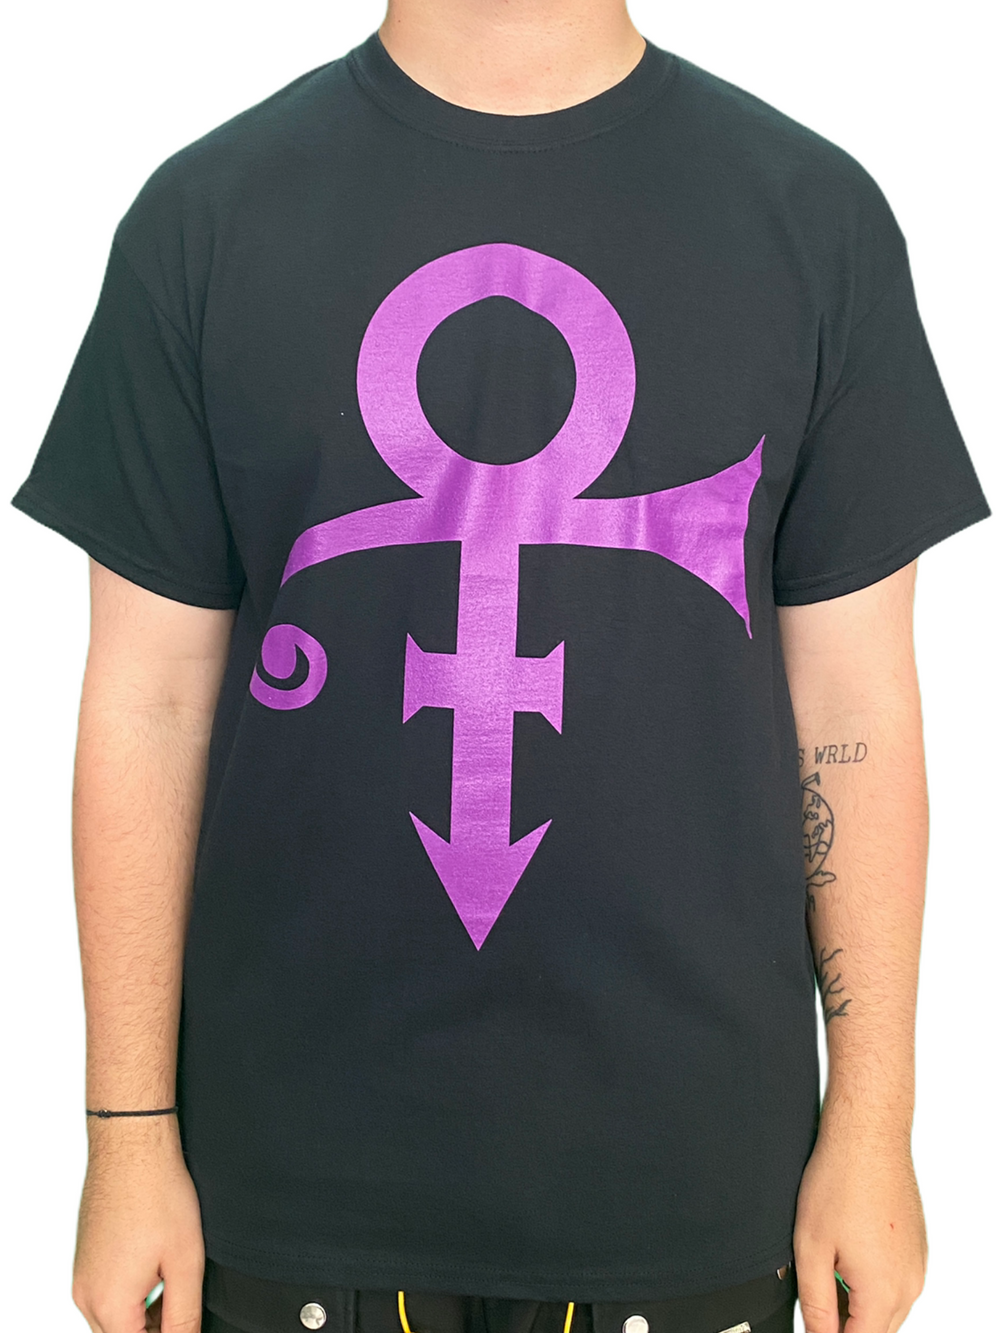 Prince – Love Symbol Unisex Official T Shirt Brand New Various Sizes PURPLE